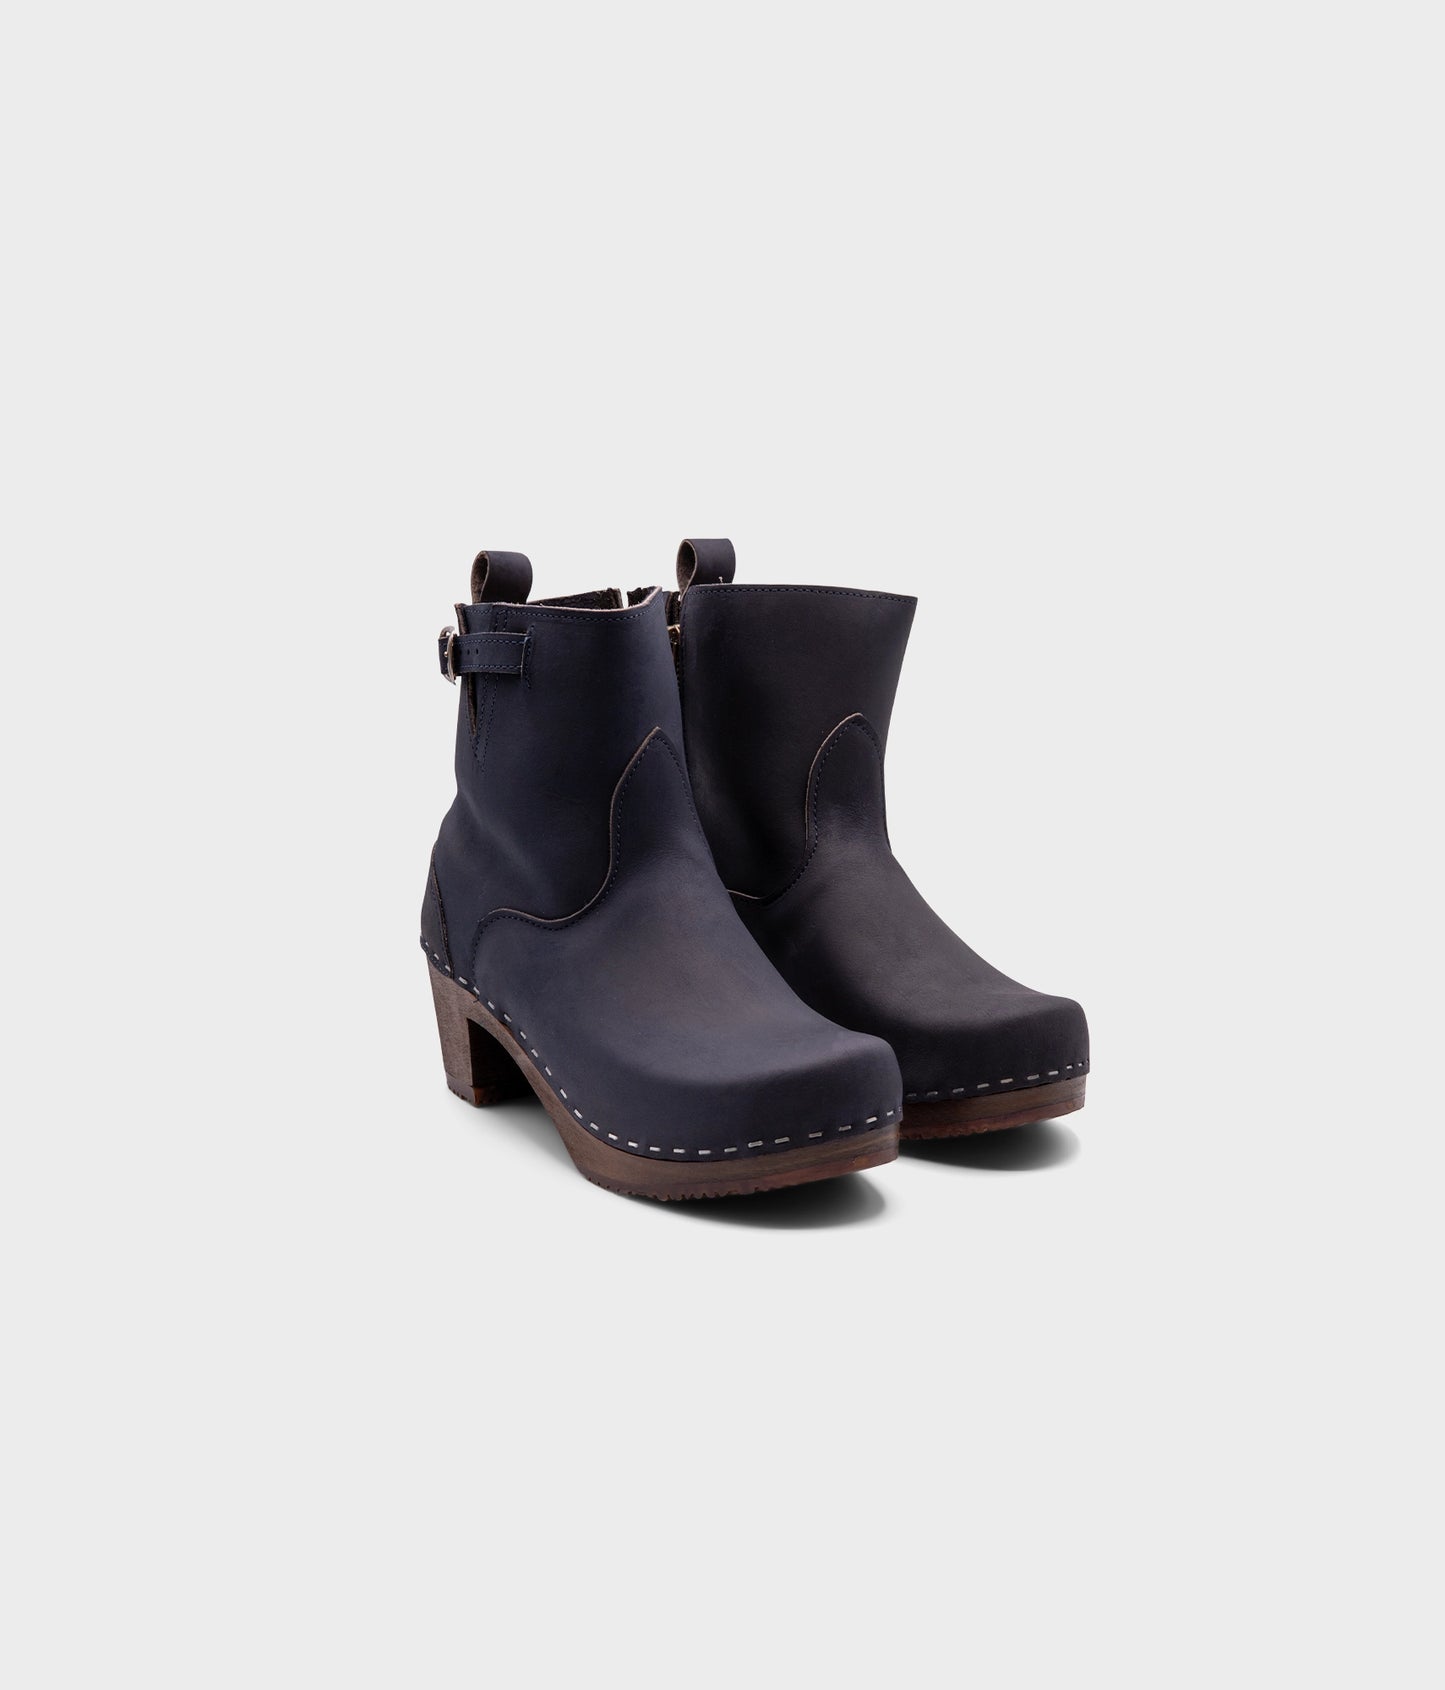 high-heeled clog boots in navy blue nubuck leather stapled on a dark wooden base with a silver buckle